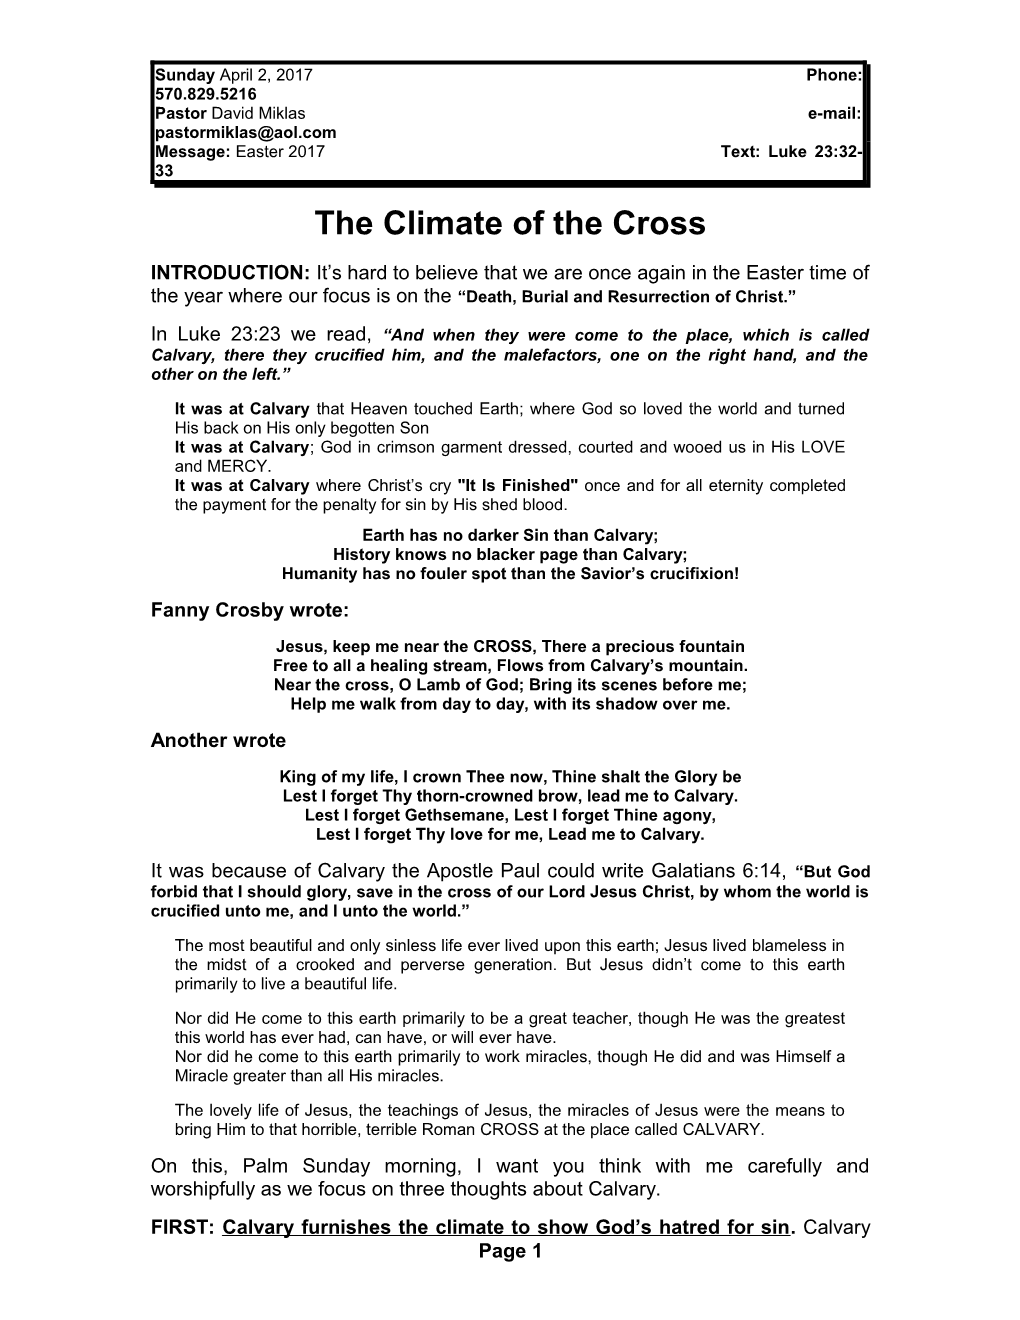 The Climate of the Cross